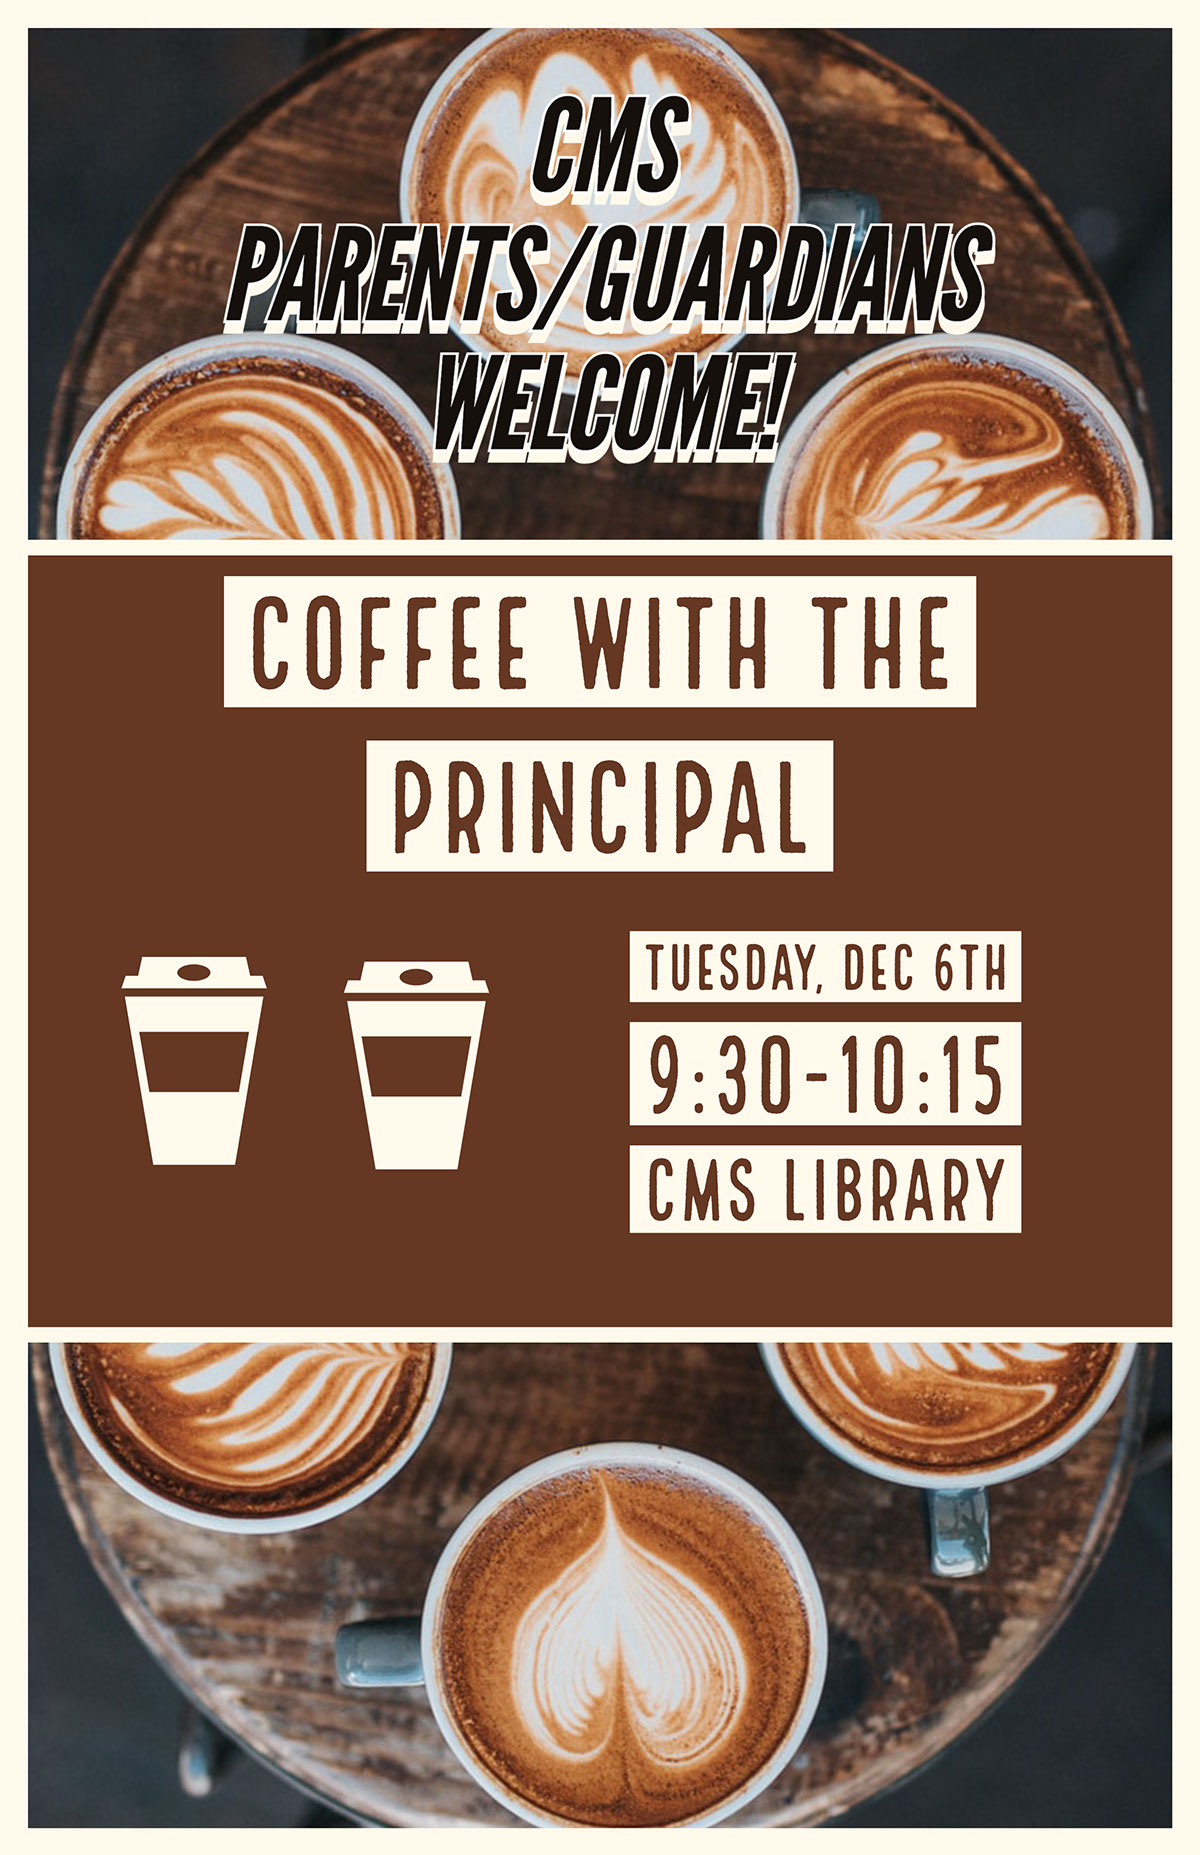 CMS PARENTS/GUARDIANS WELCOME! CMS PARENTS/GUARDIANS WELCOME! COFFEE WITH THE PRINCIPAL Tuesday, Dec 6th 9:30-10:15 CMS LIBRARY